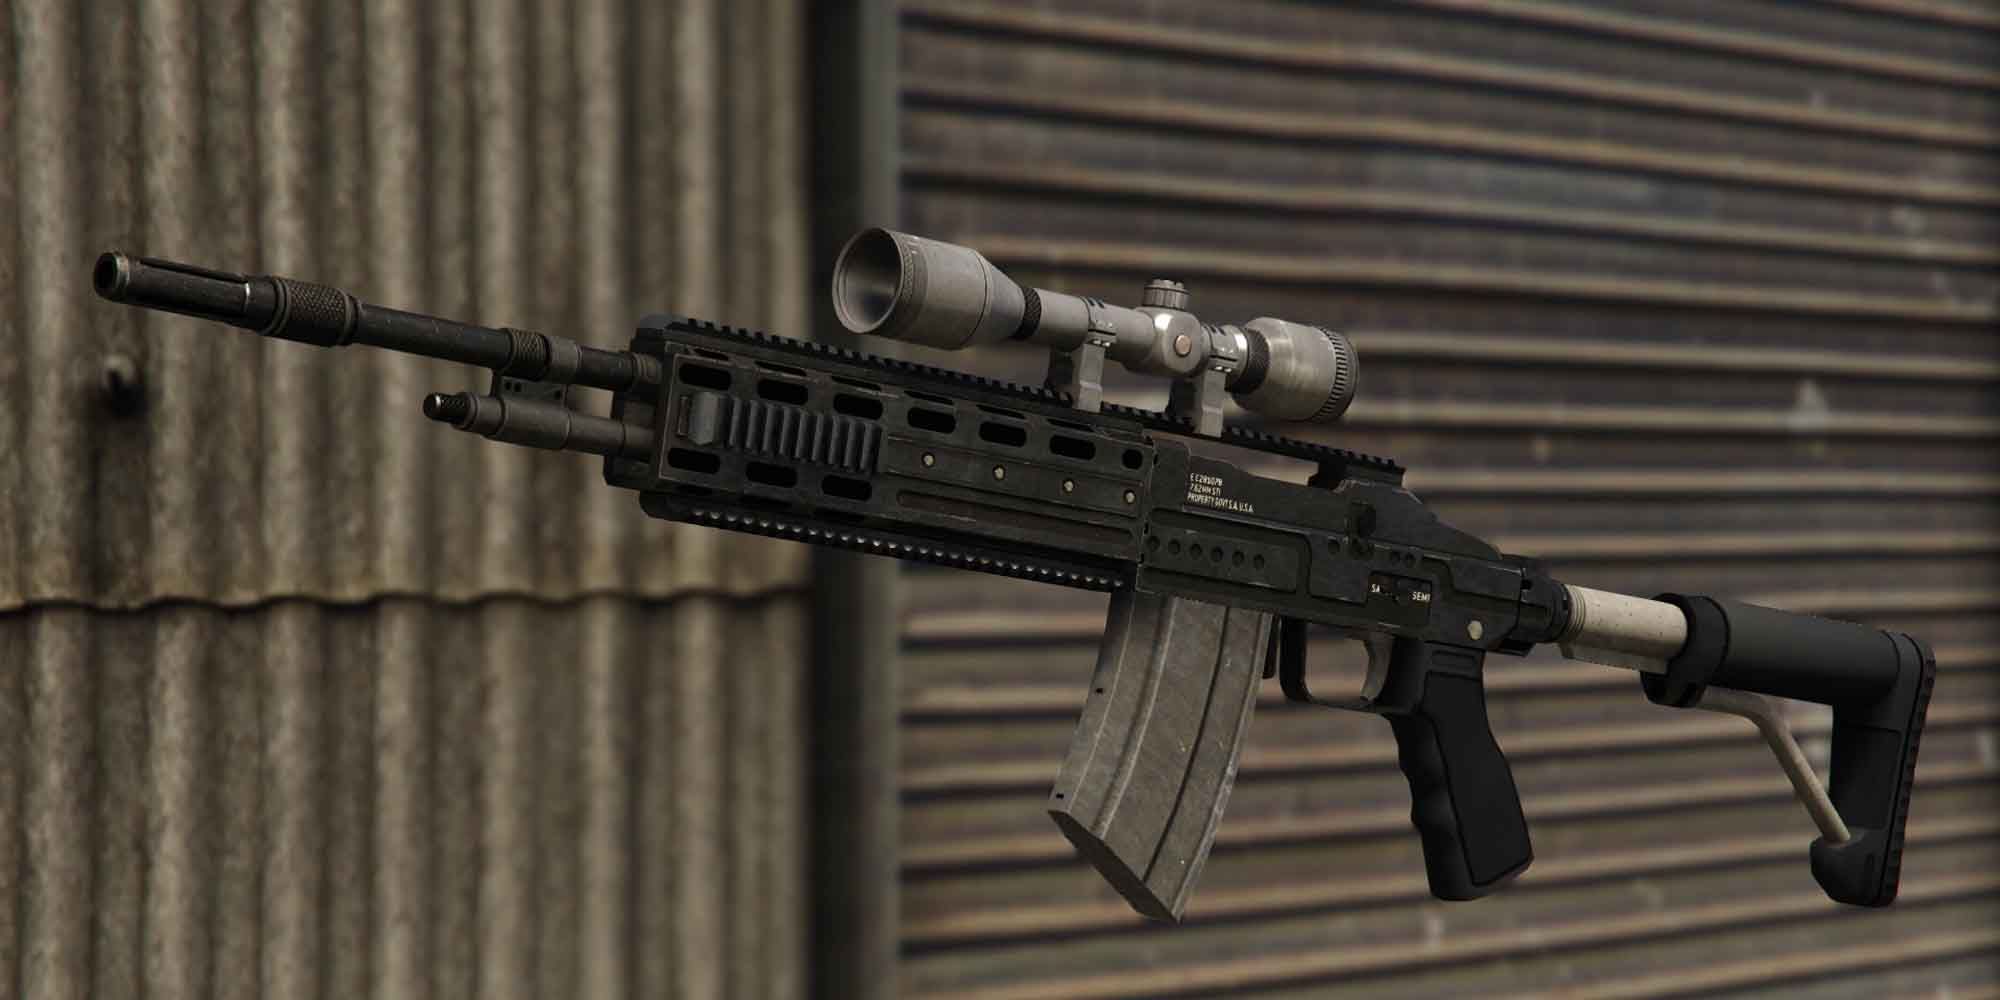 The highly accurate Marksman Rifle GTA 5